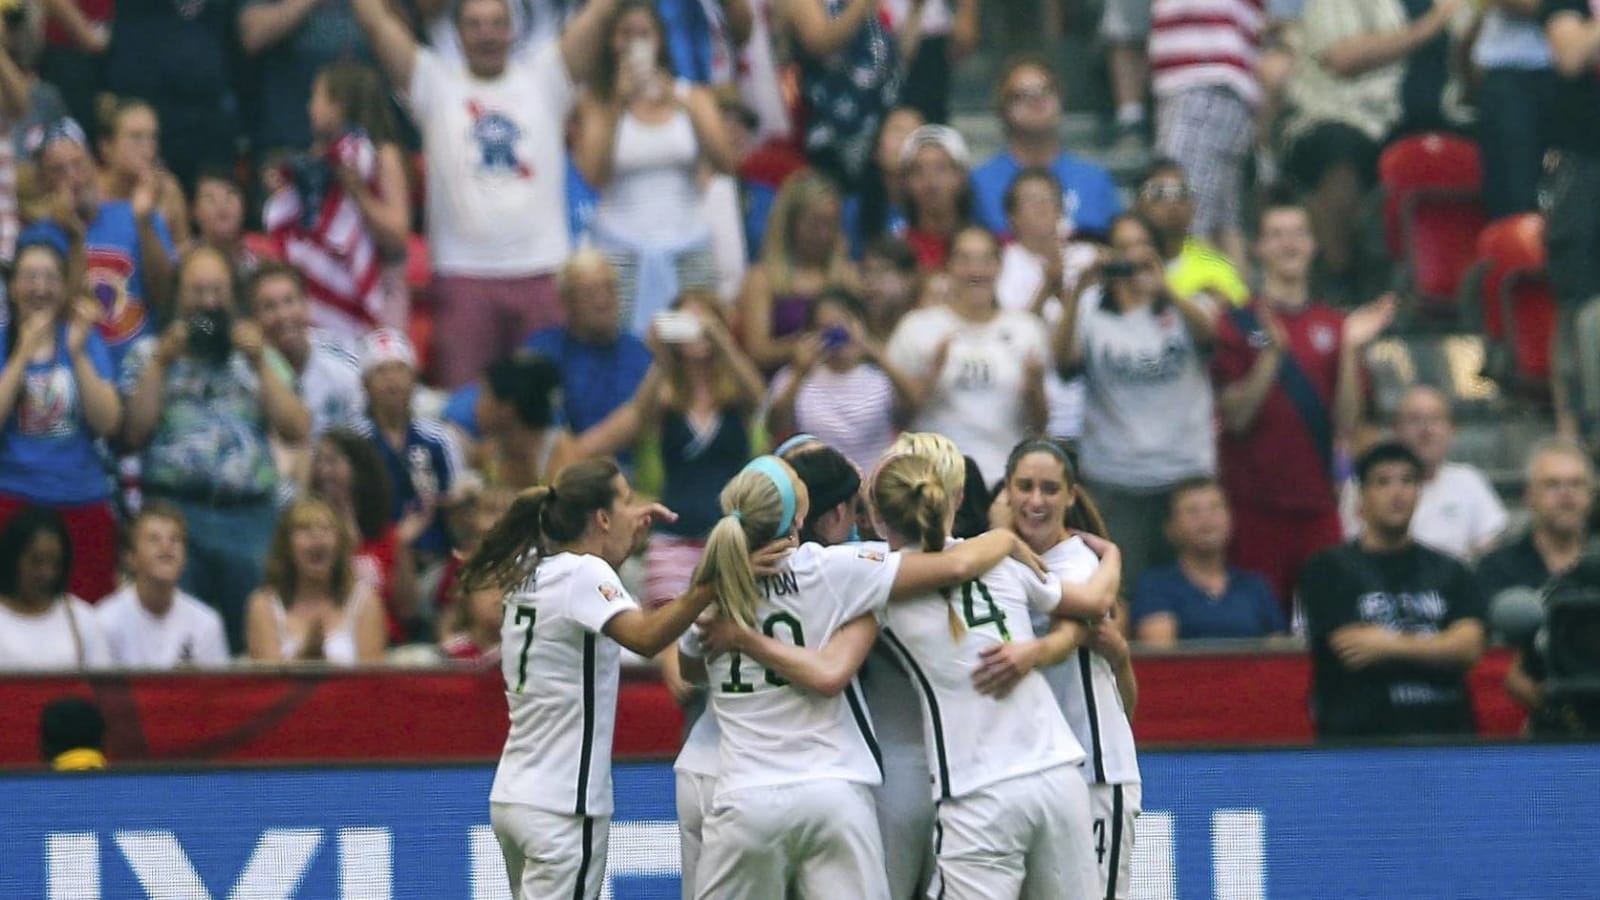 The '2015 USWNT FIFA Women's World Cup team' quiz